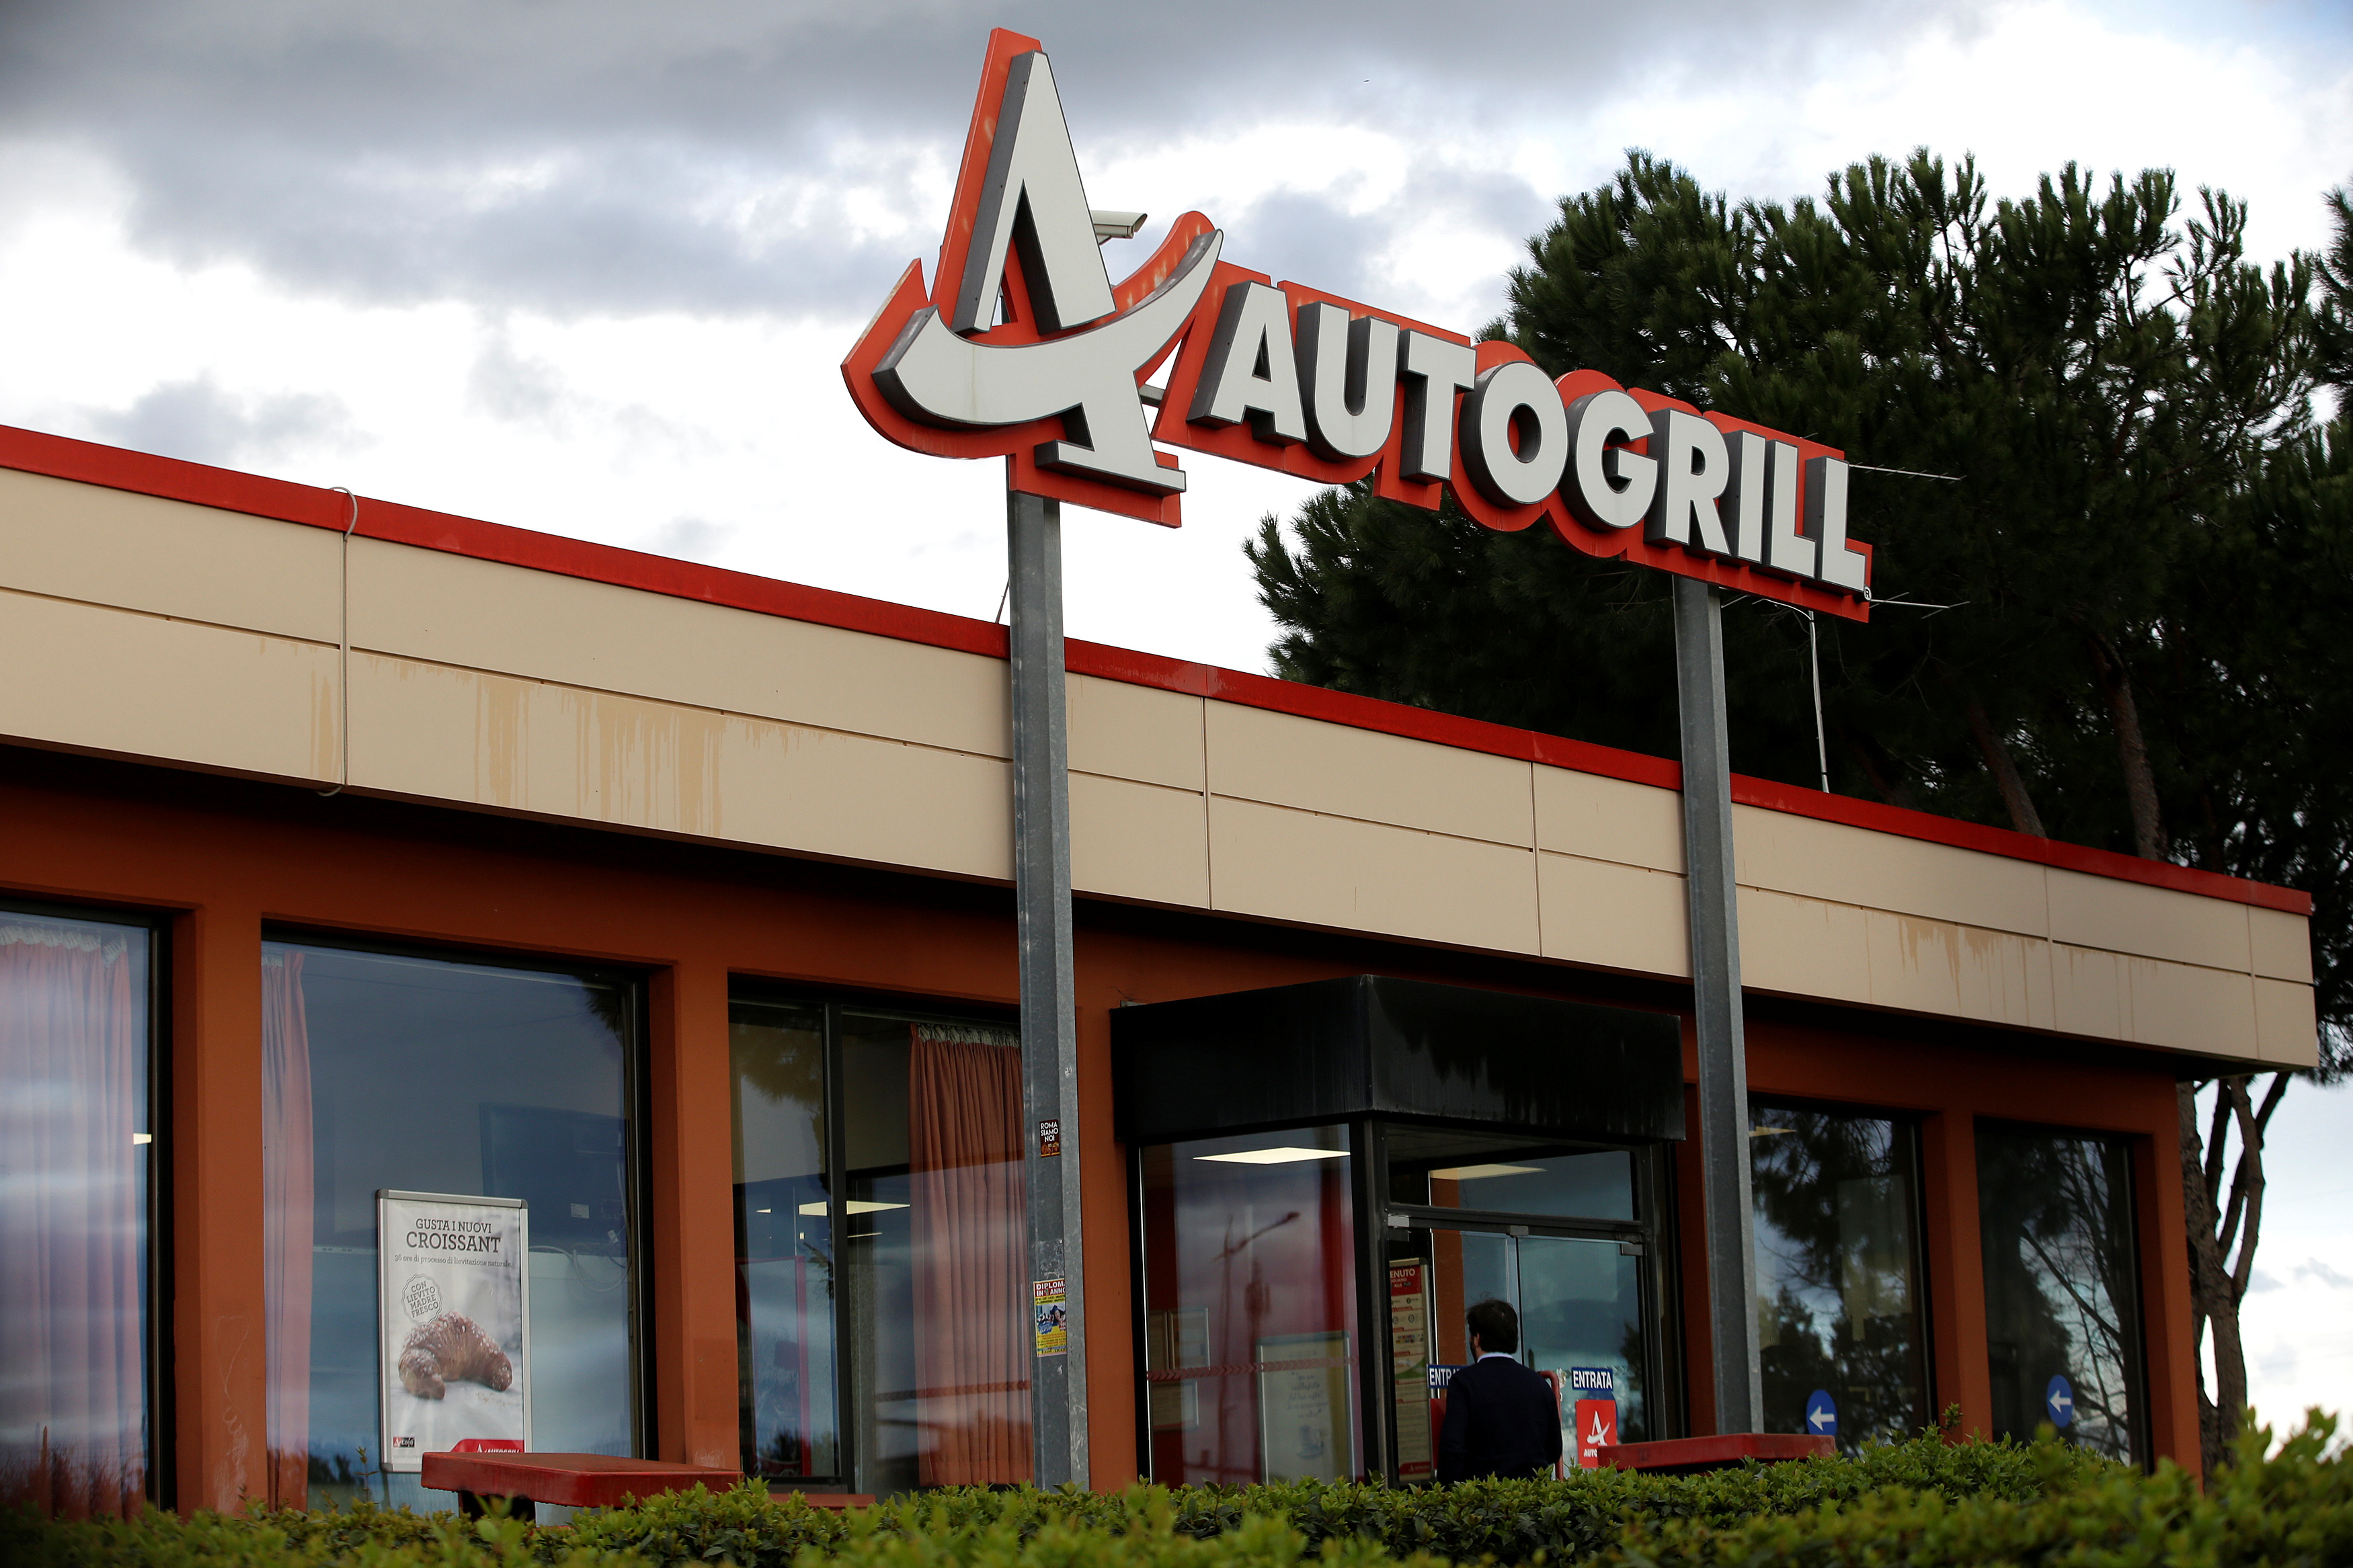 An Autogrill point is seen along the Grande Raccordo Anulare (Great Ring Junction) motorway in Rome